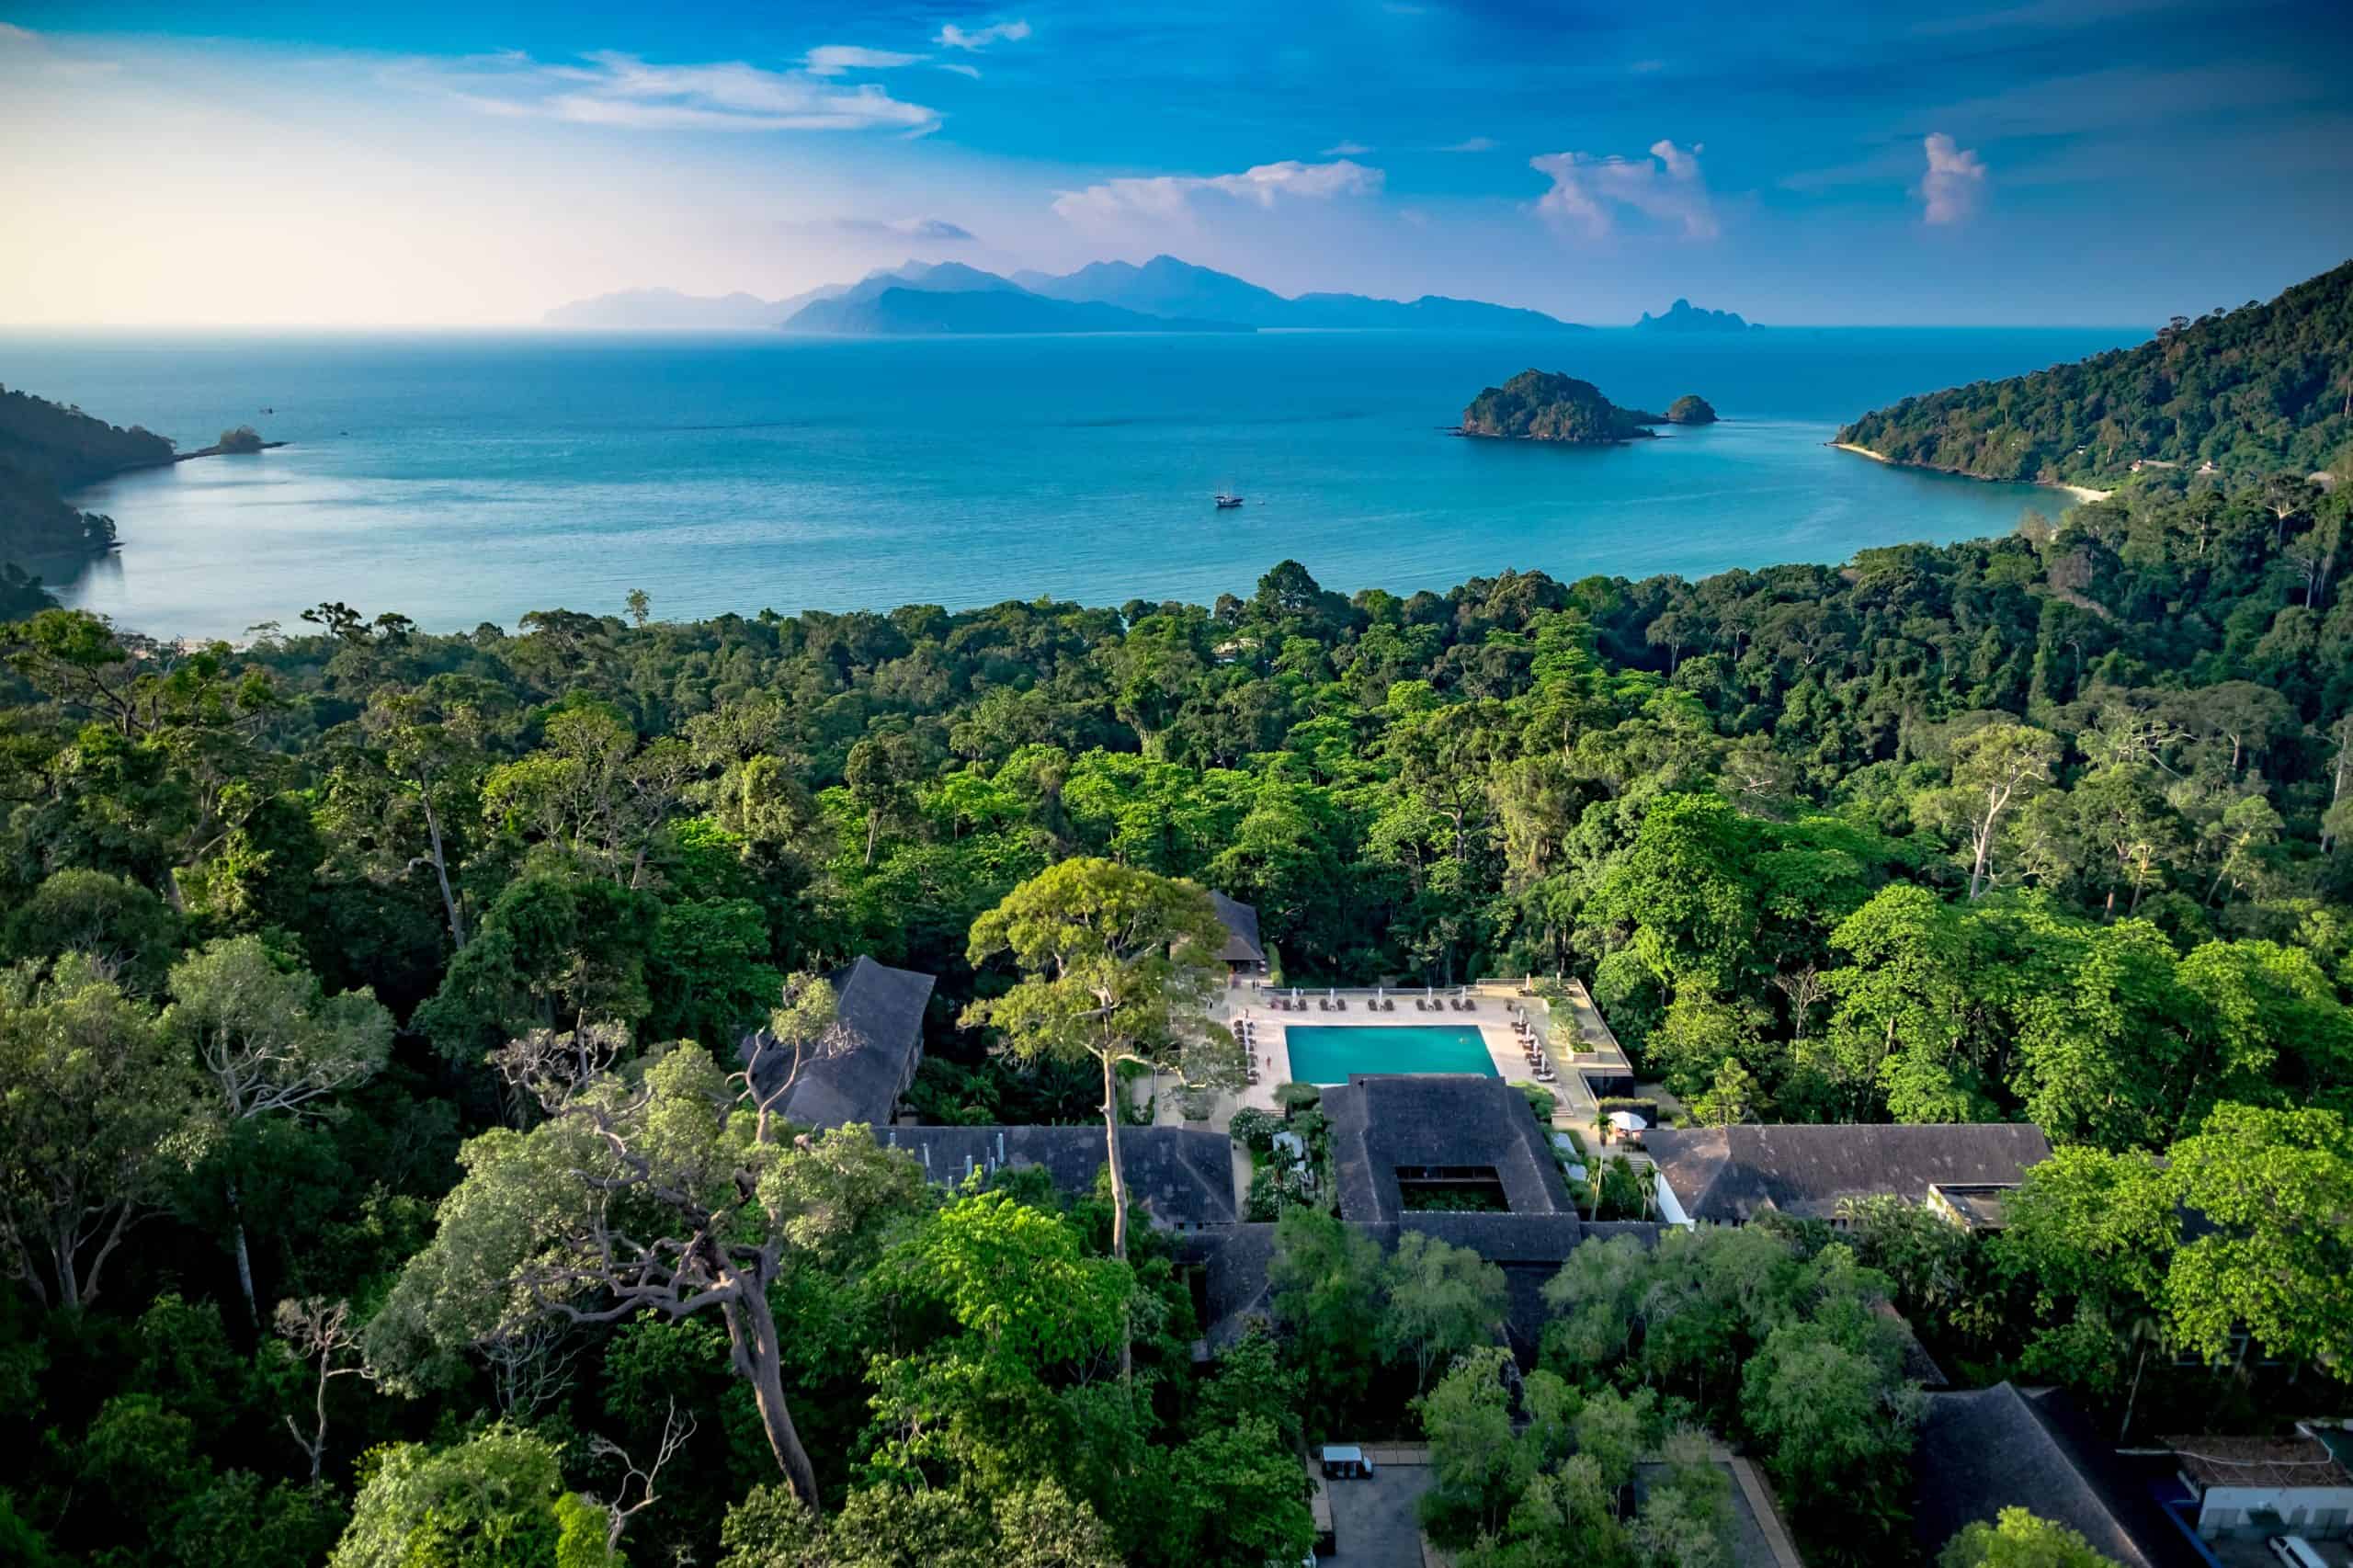 The-Datai-Langkawi-Resort-Overview-6-scaled